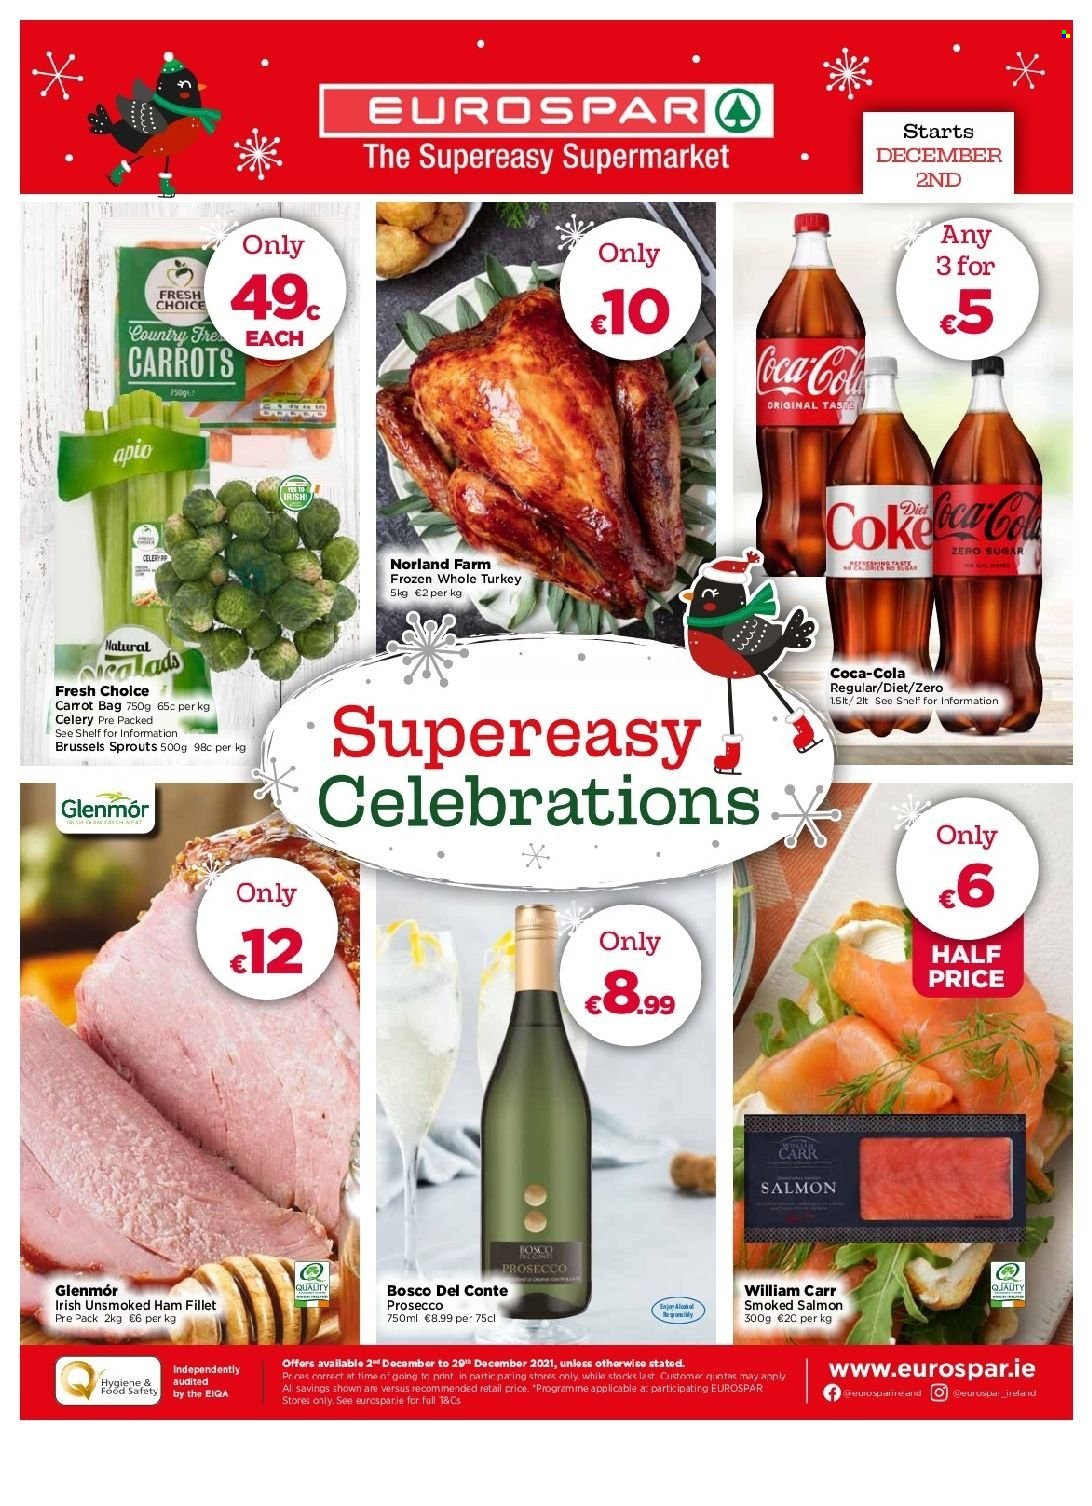 EUROSPAR offer  - 2.12.2021 - 29.12.2021 - Sales products - carrots, celery, brussels sprout, salmon, smoked salmon, ham, Celebration, Coca-Cola, prosecco, whole turkey, turkey meat, bag. Page 1.